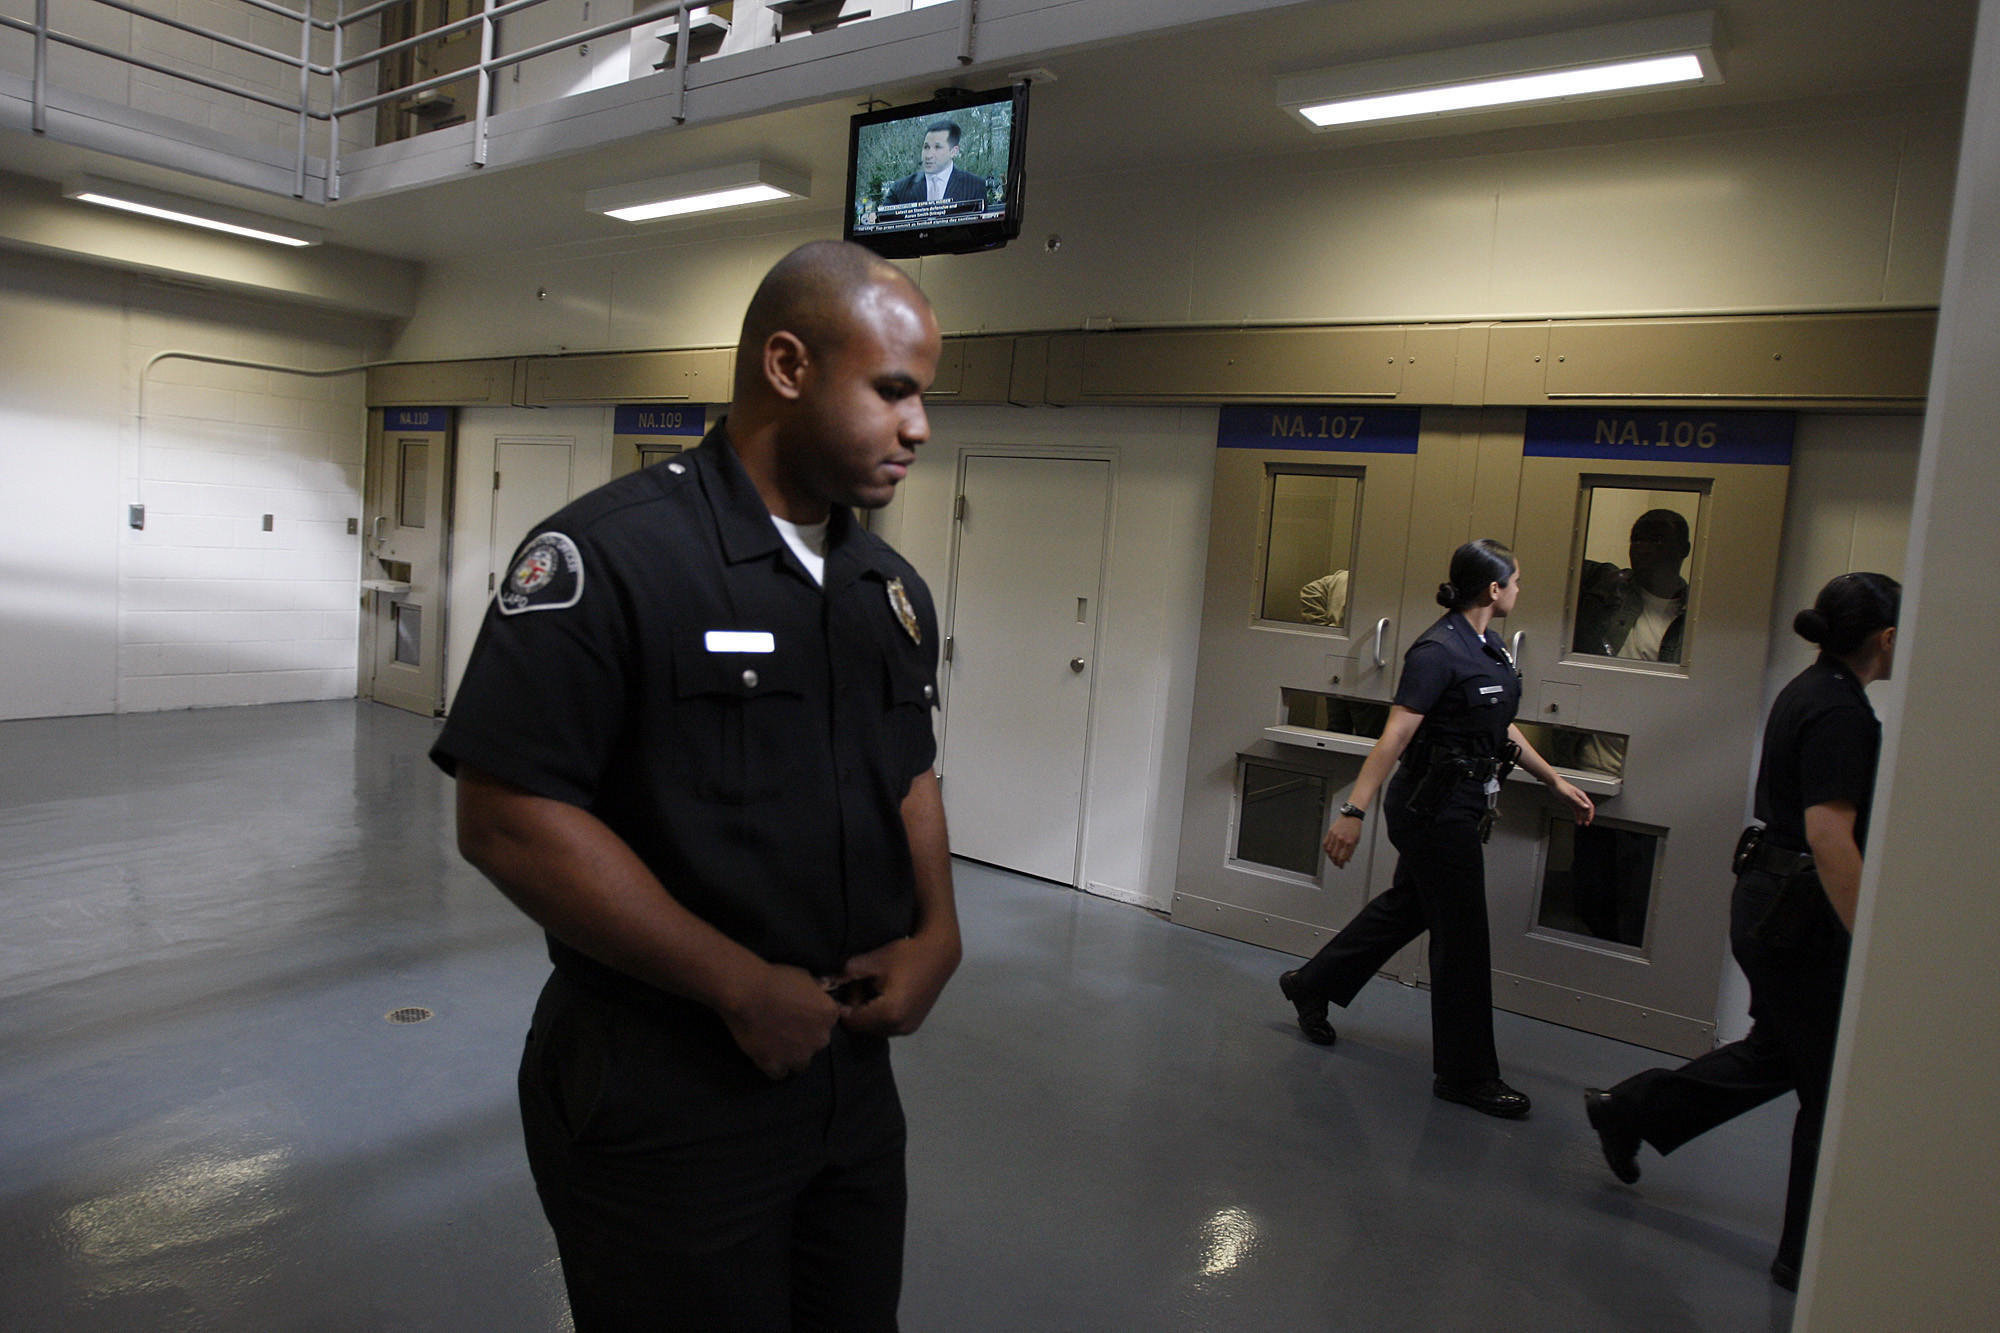 LAPD jailers didn't conduct proper cell checks 8 times out of 10